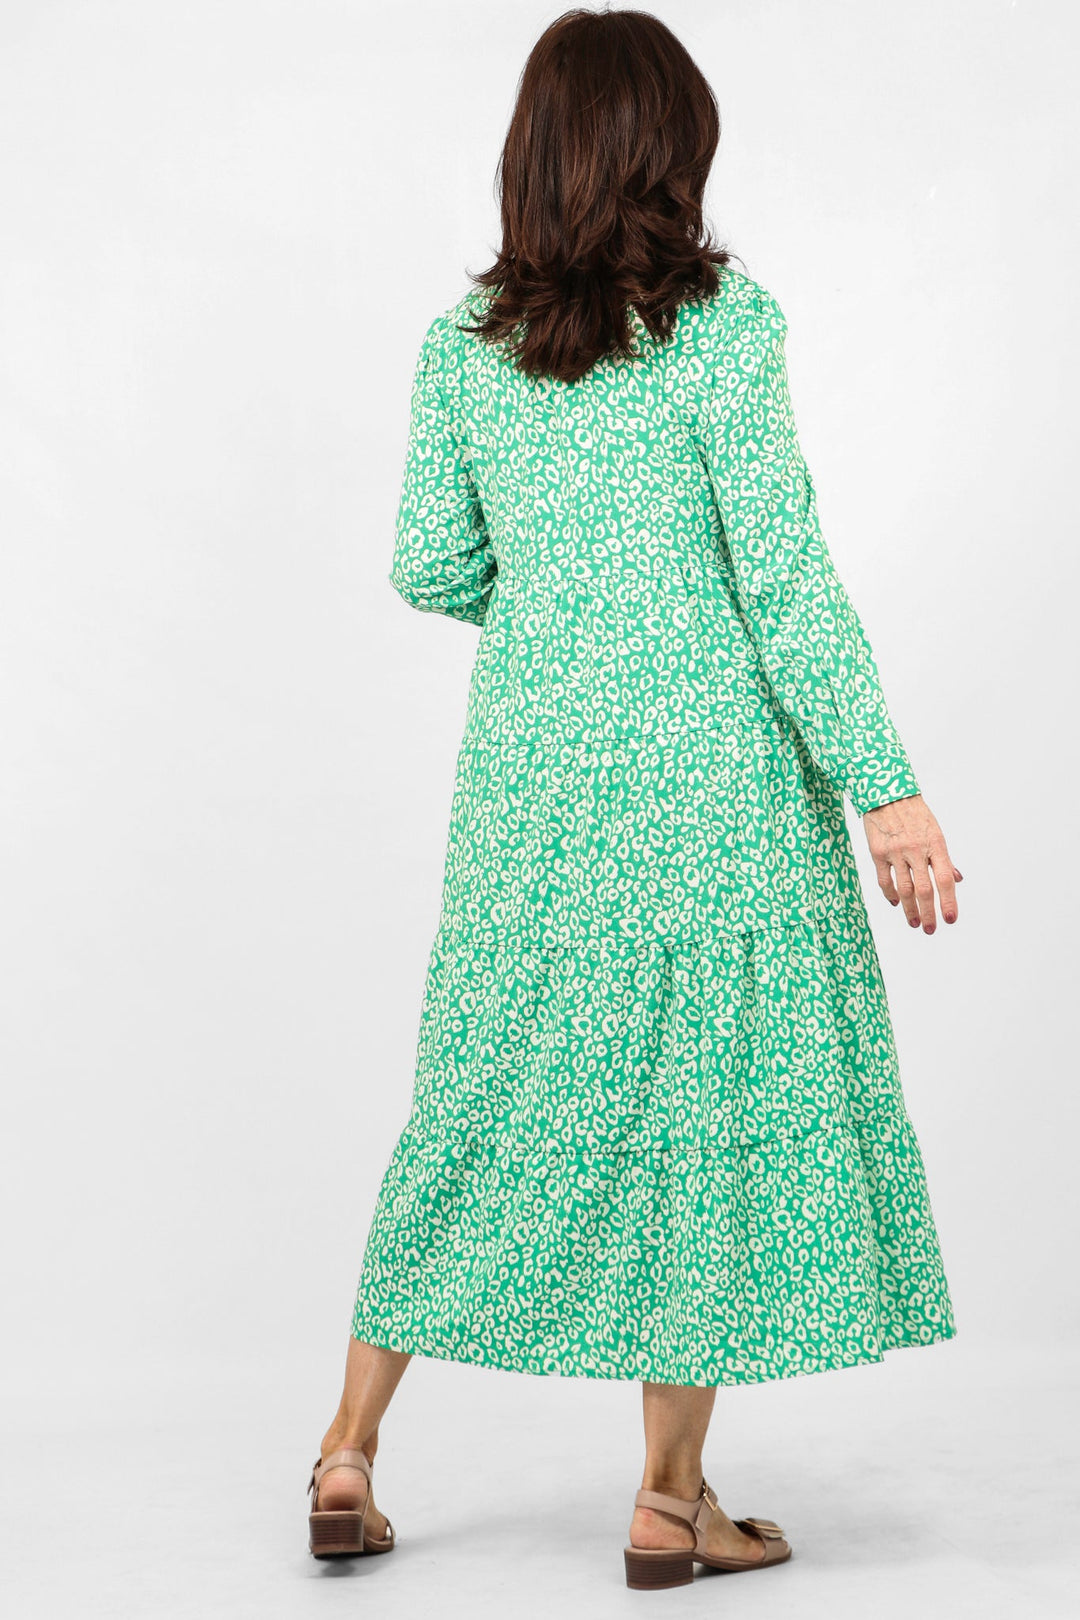 Green Two Tone Leopard Print Tiered Dress with Frill Collar